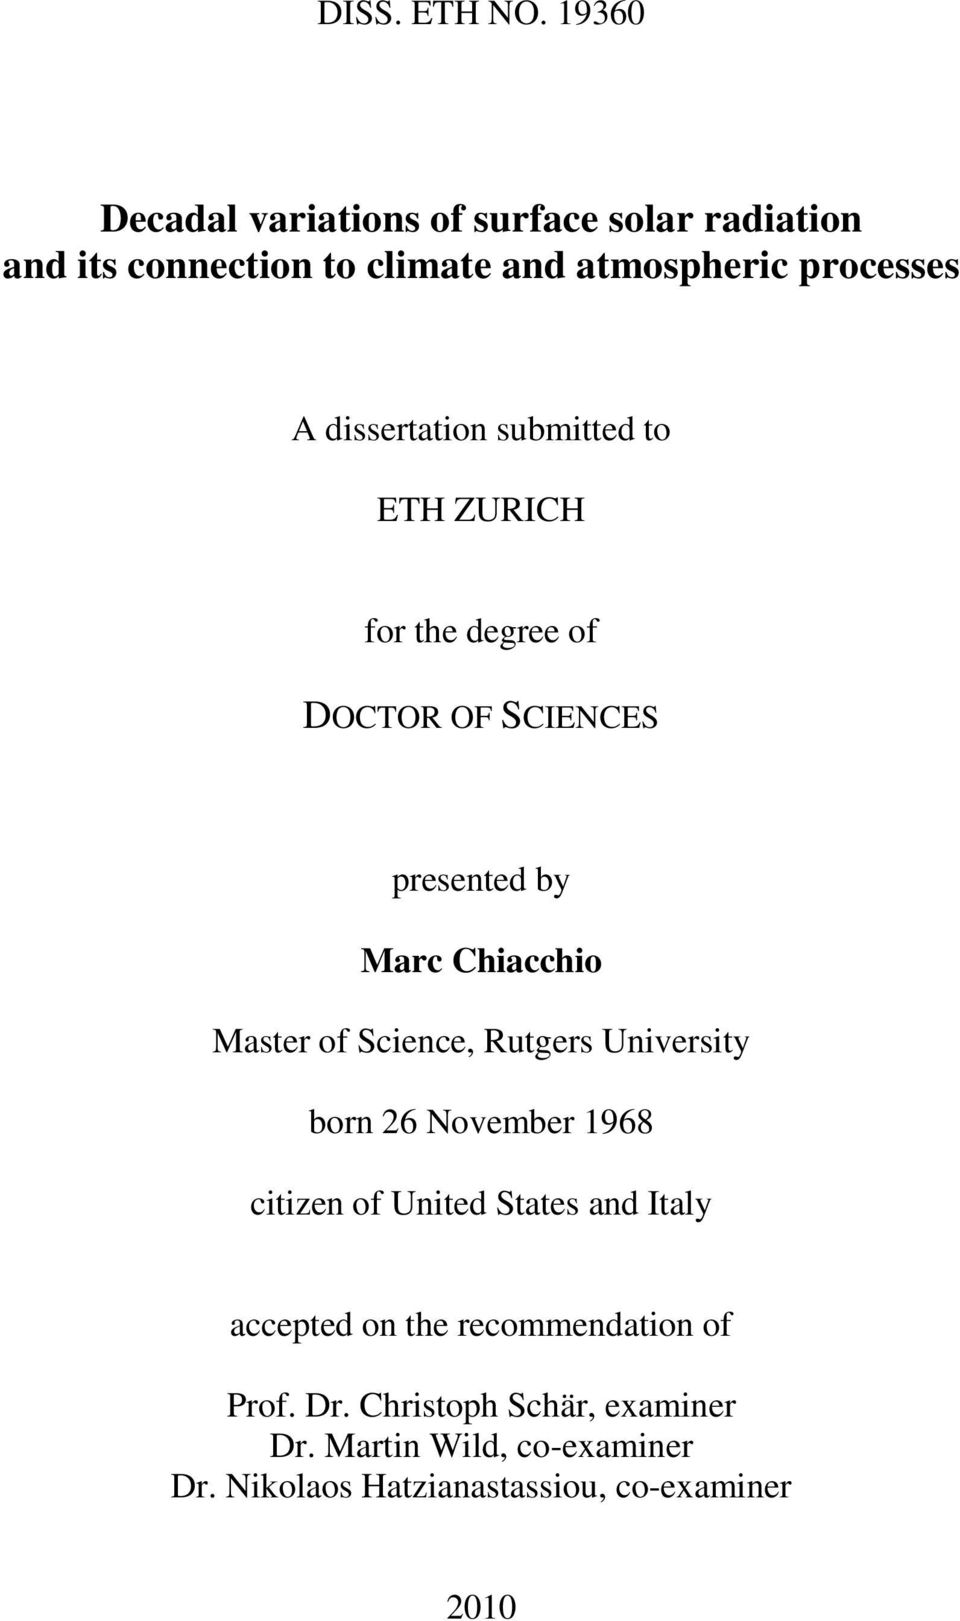 dissertation submitted to ETH ZURICH for the degree of DOCTOR OF SCIENCES presented by Marc Chiacchio Master of